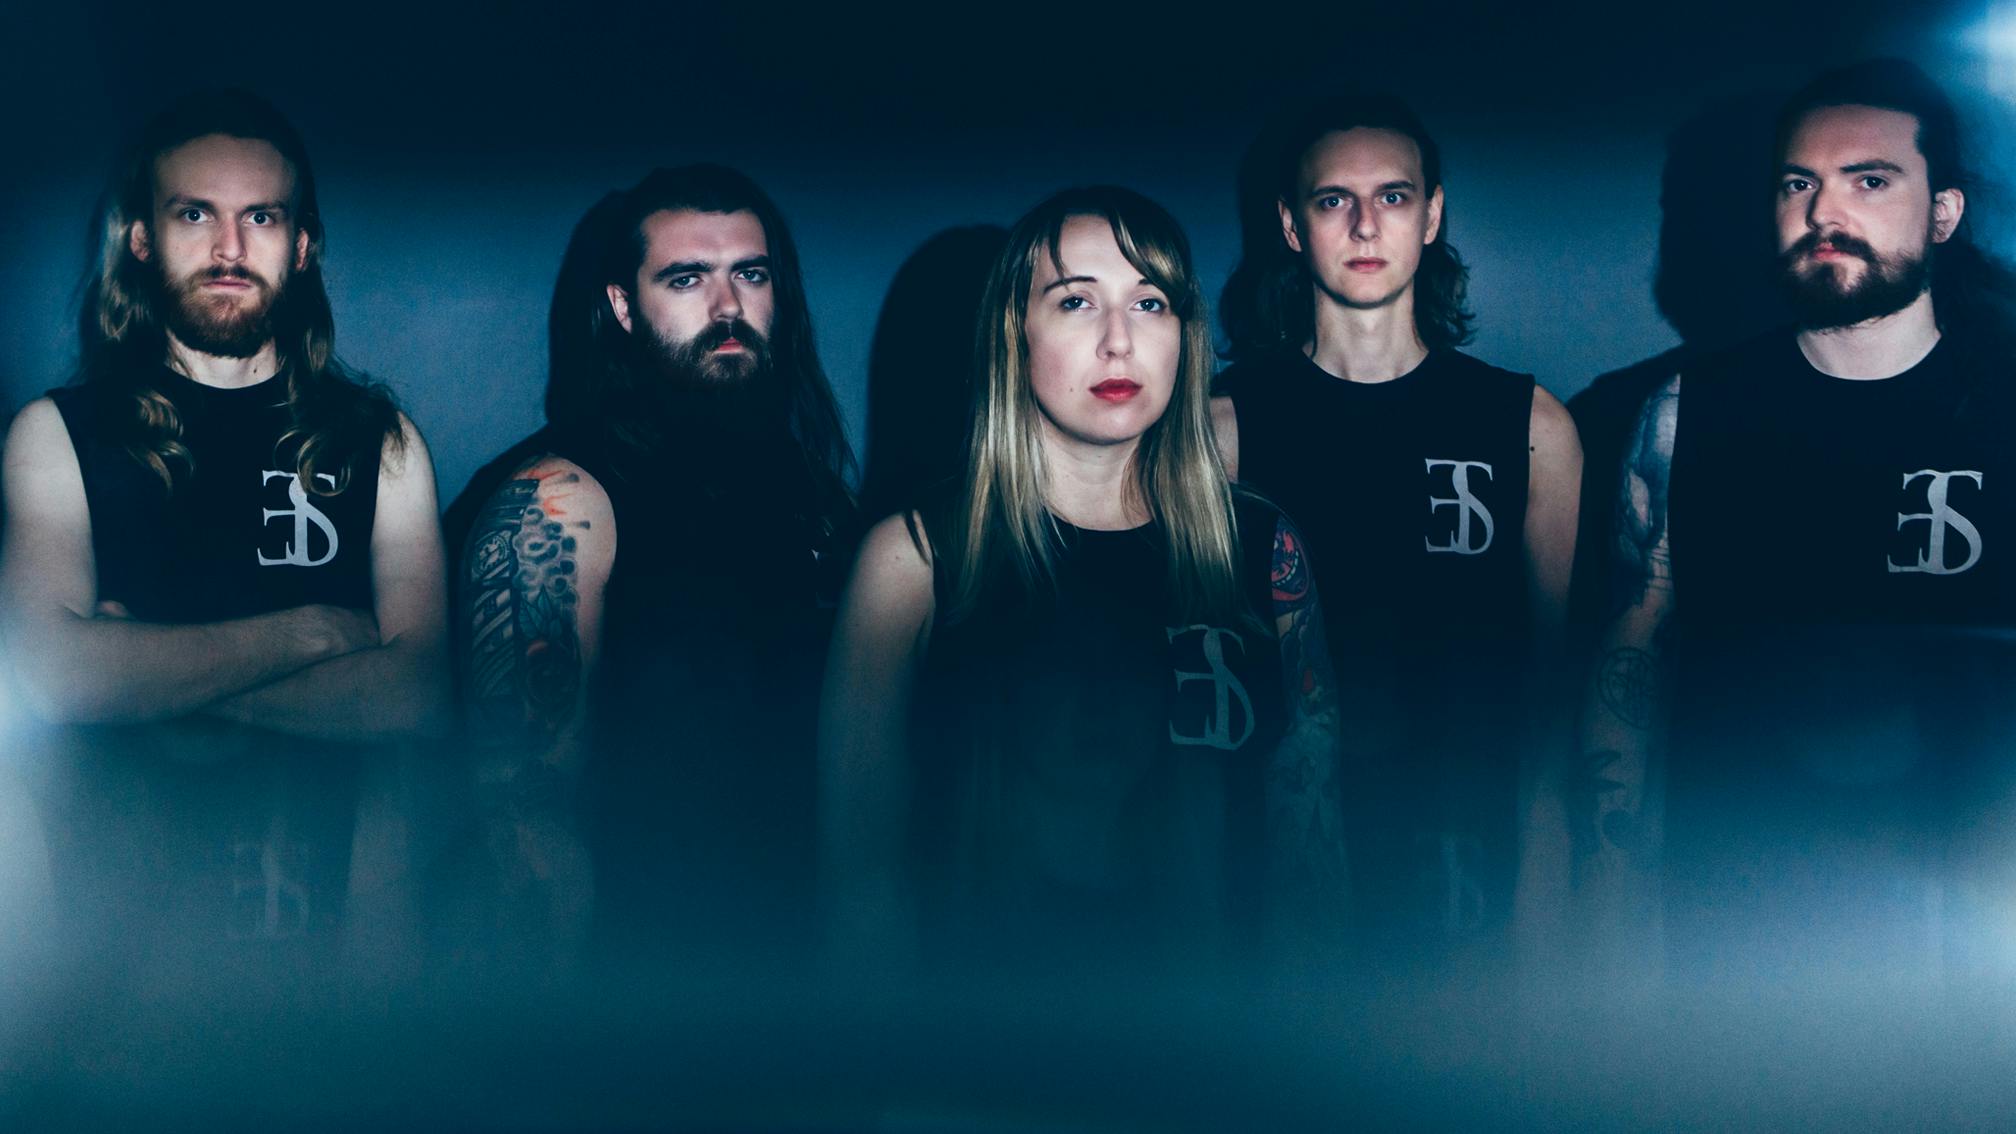 "We wanted to go a more metal-orientated direction…" Employed To Serve announce fourth album, Conquering